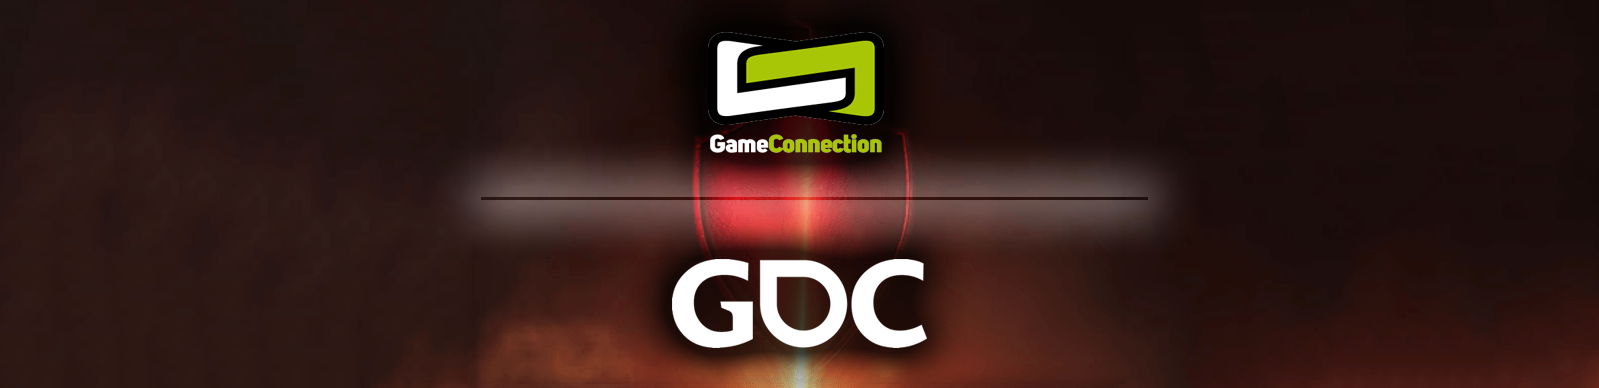 GDC and Game Connection 2014